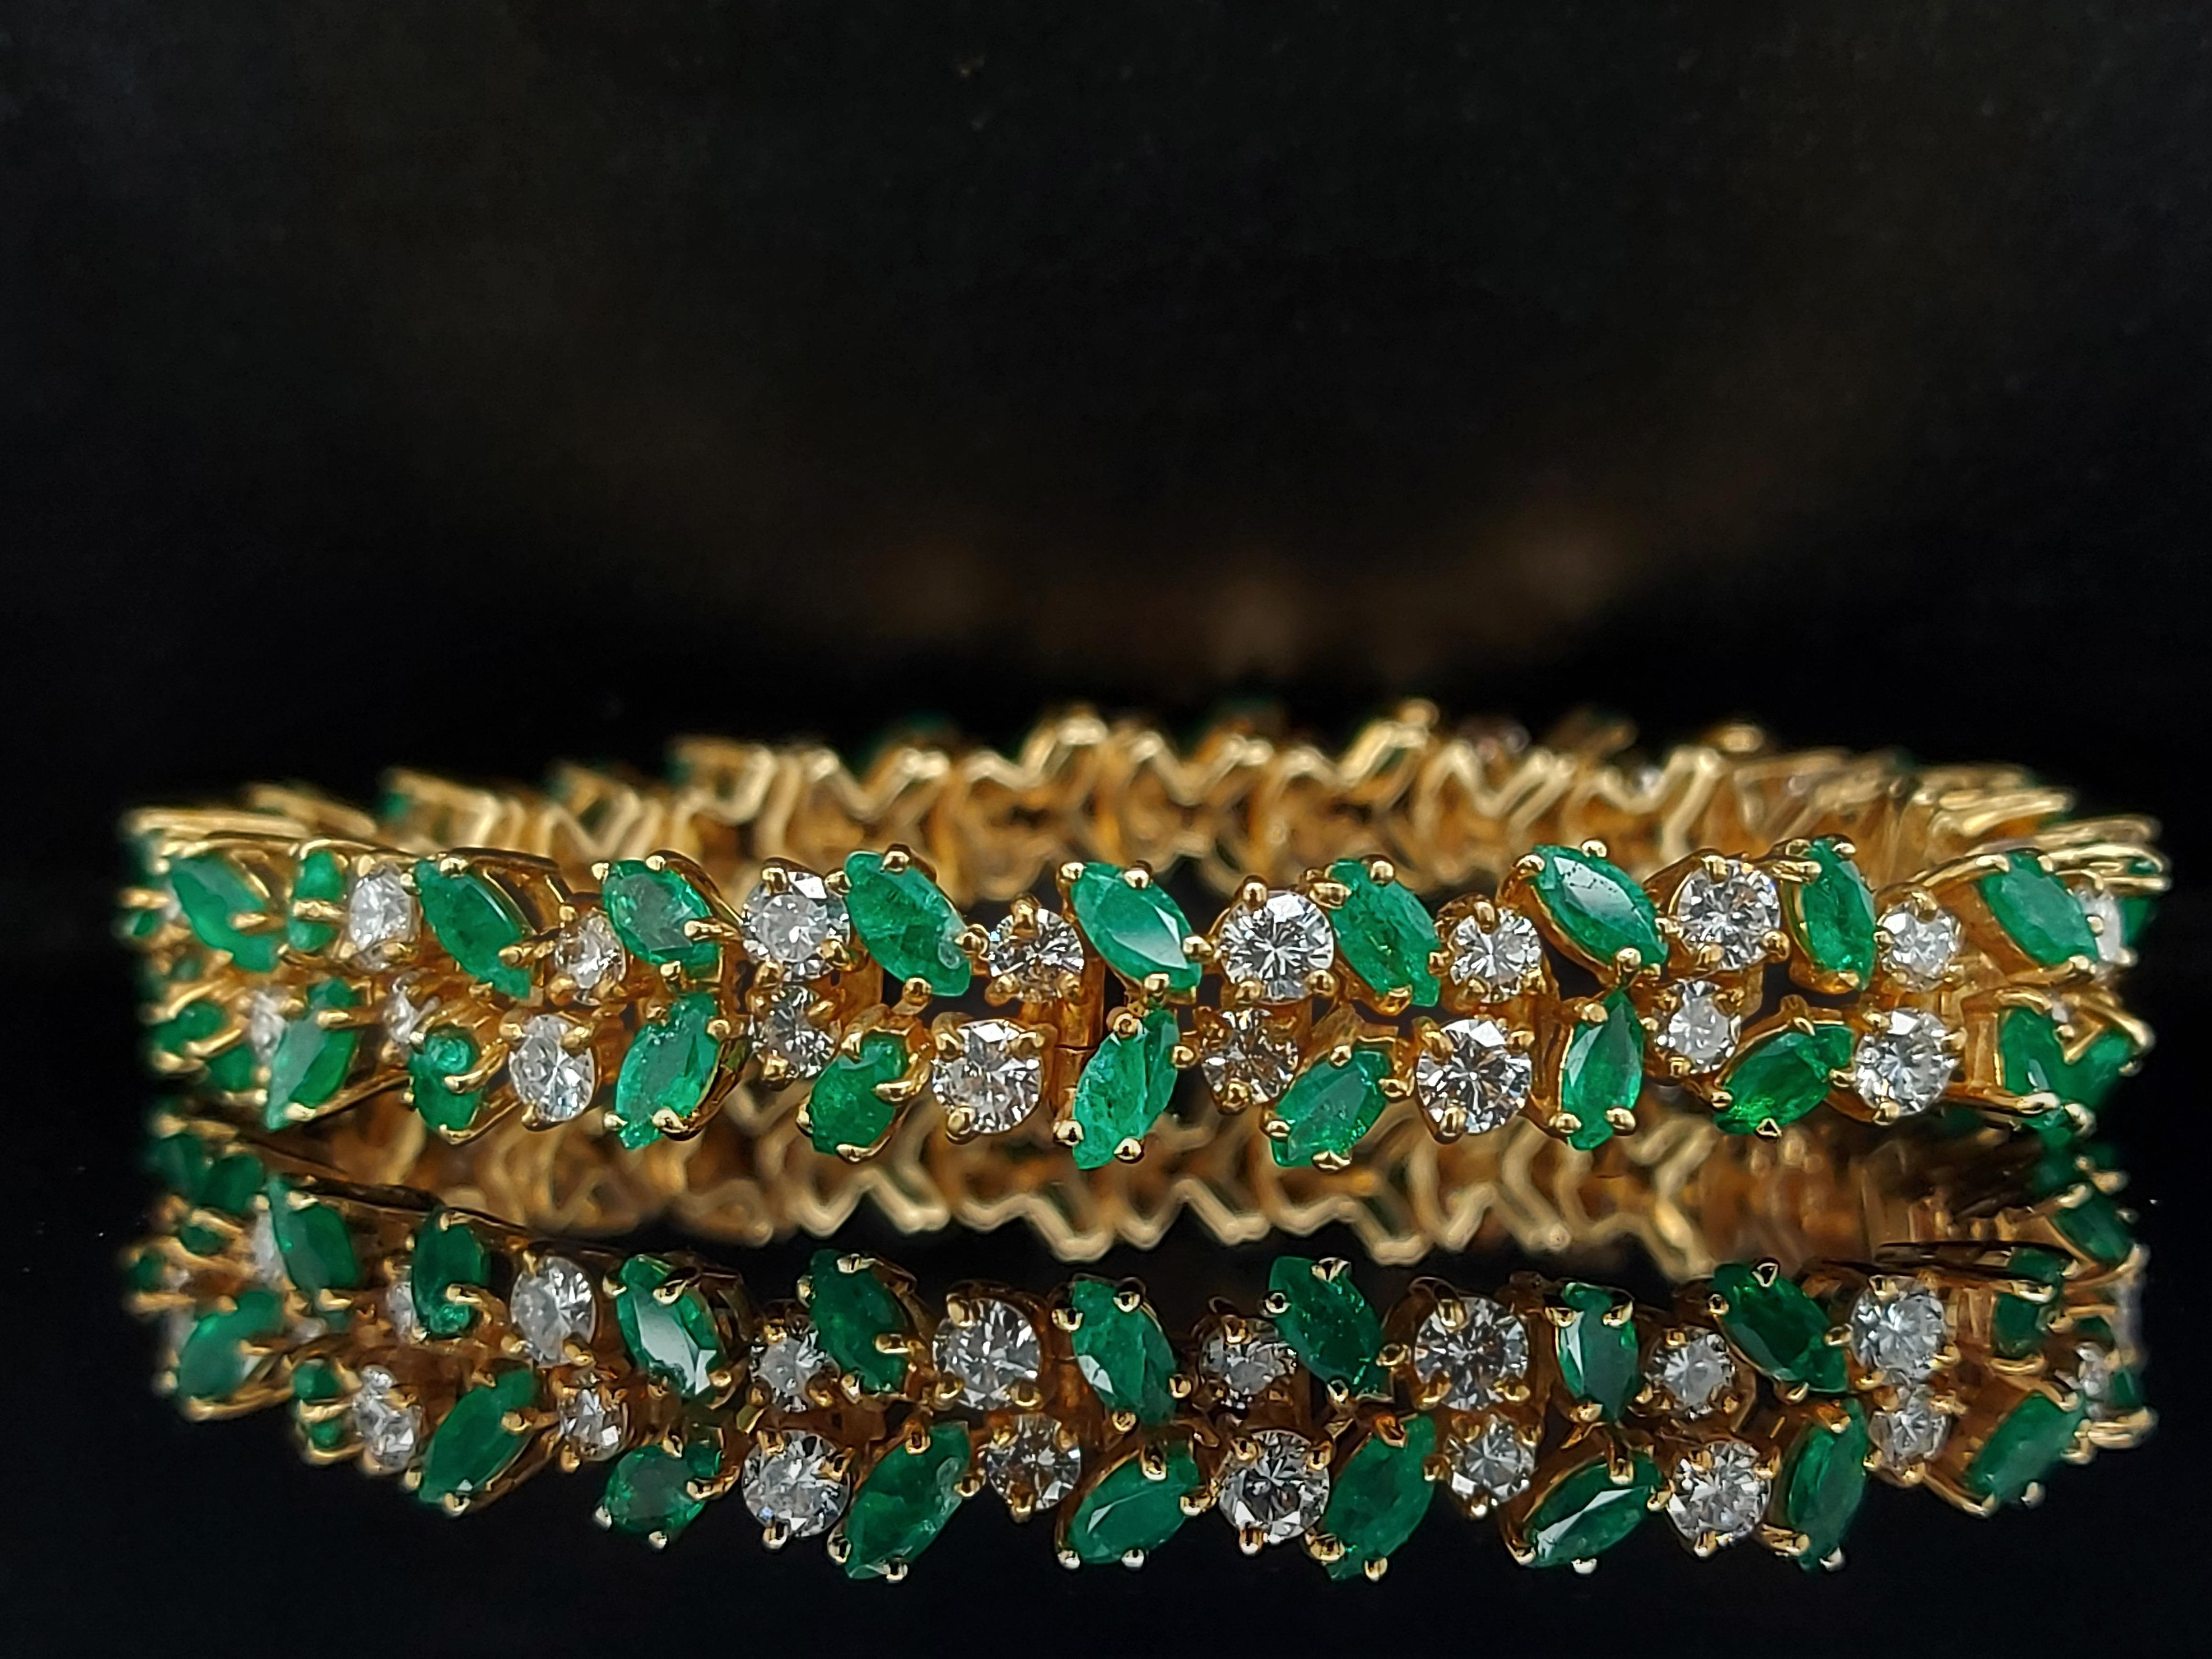 Luxurious Bracelet With 6.75 Ct Diamonds and 10 Ct Emeralds

Diamonds: Brilliant cut diamonds, together ca. 6.75 cts

Emeralds: Marquise cut emeralds, together ca. 10 cts

Material: 18 kt yellow gold

Measurements: Will max fit a 16 cm wrist

Total